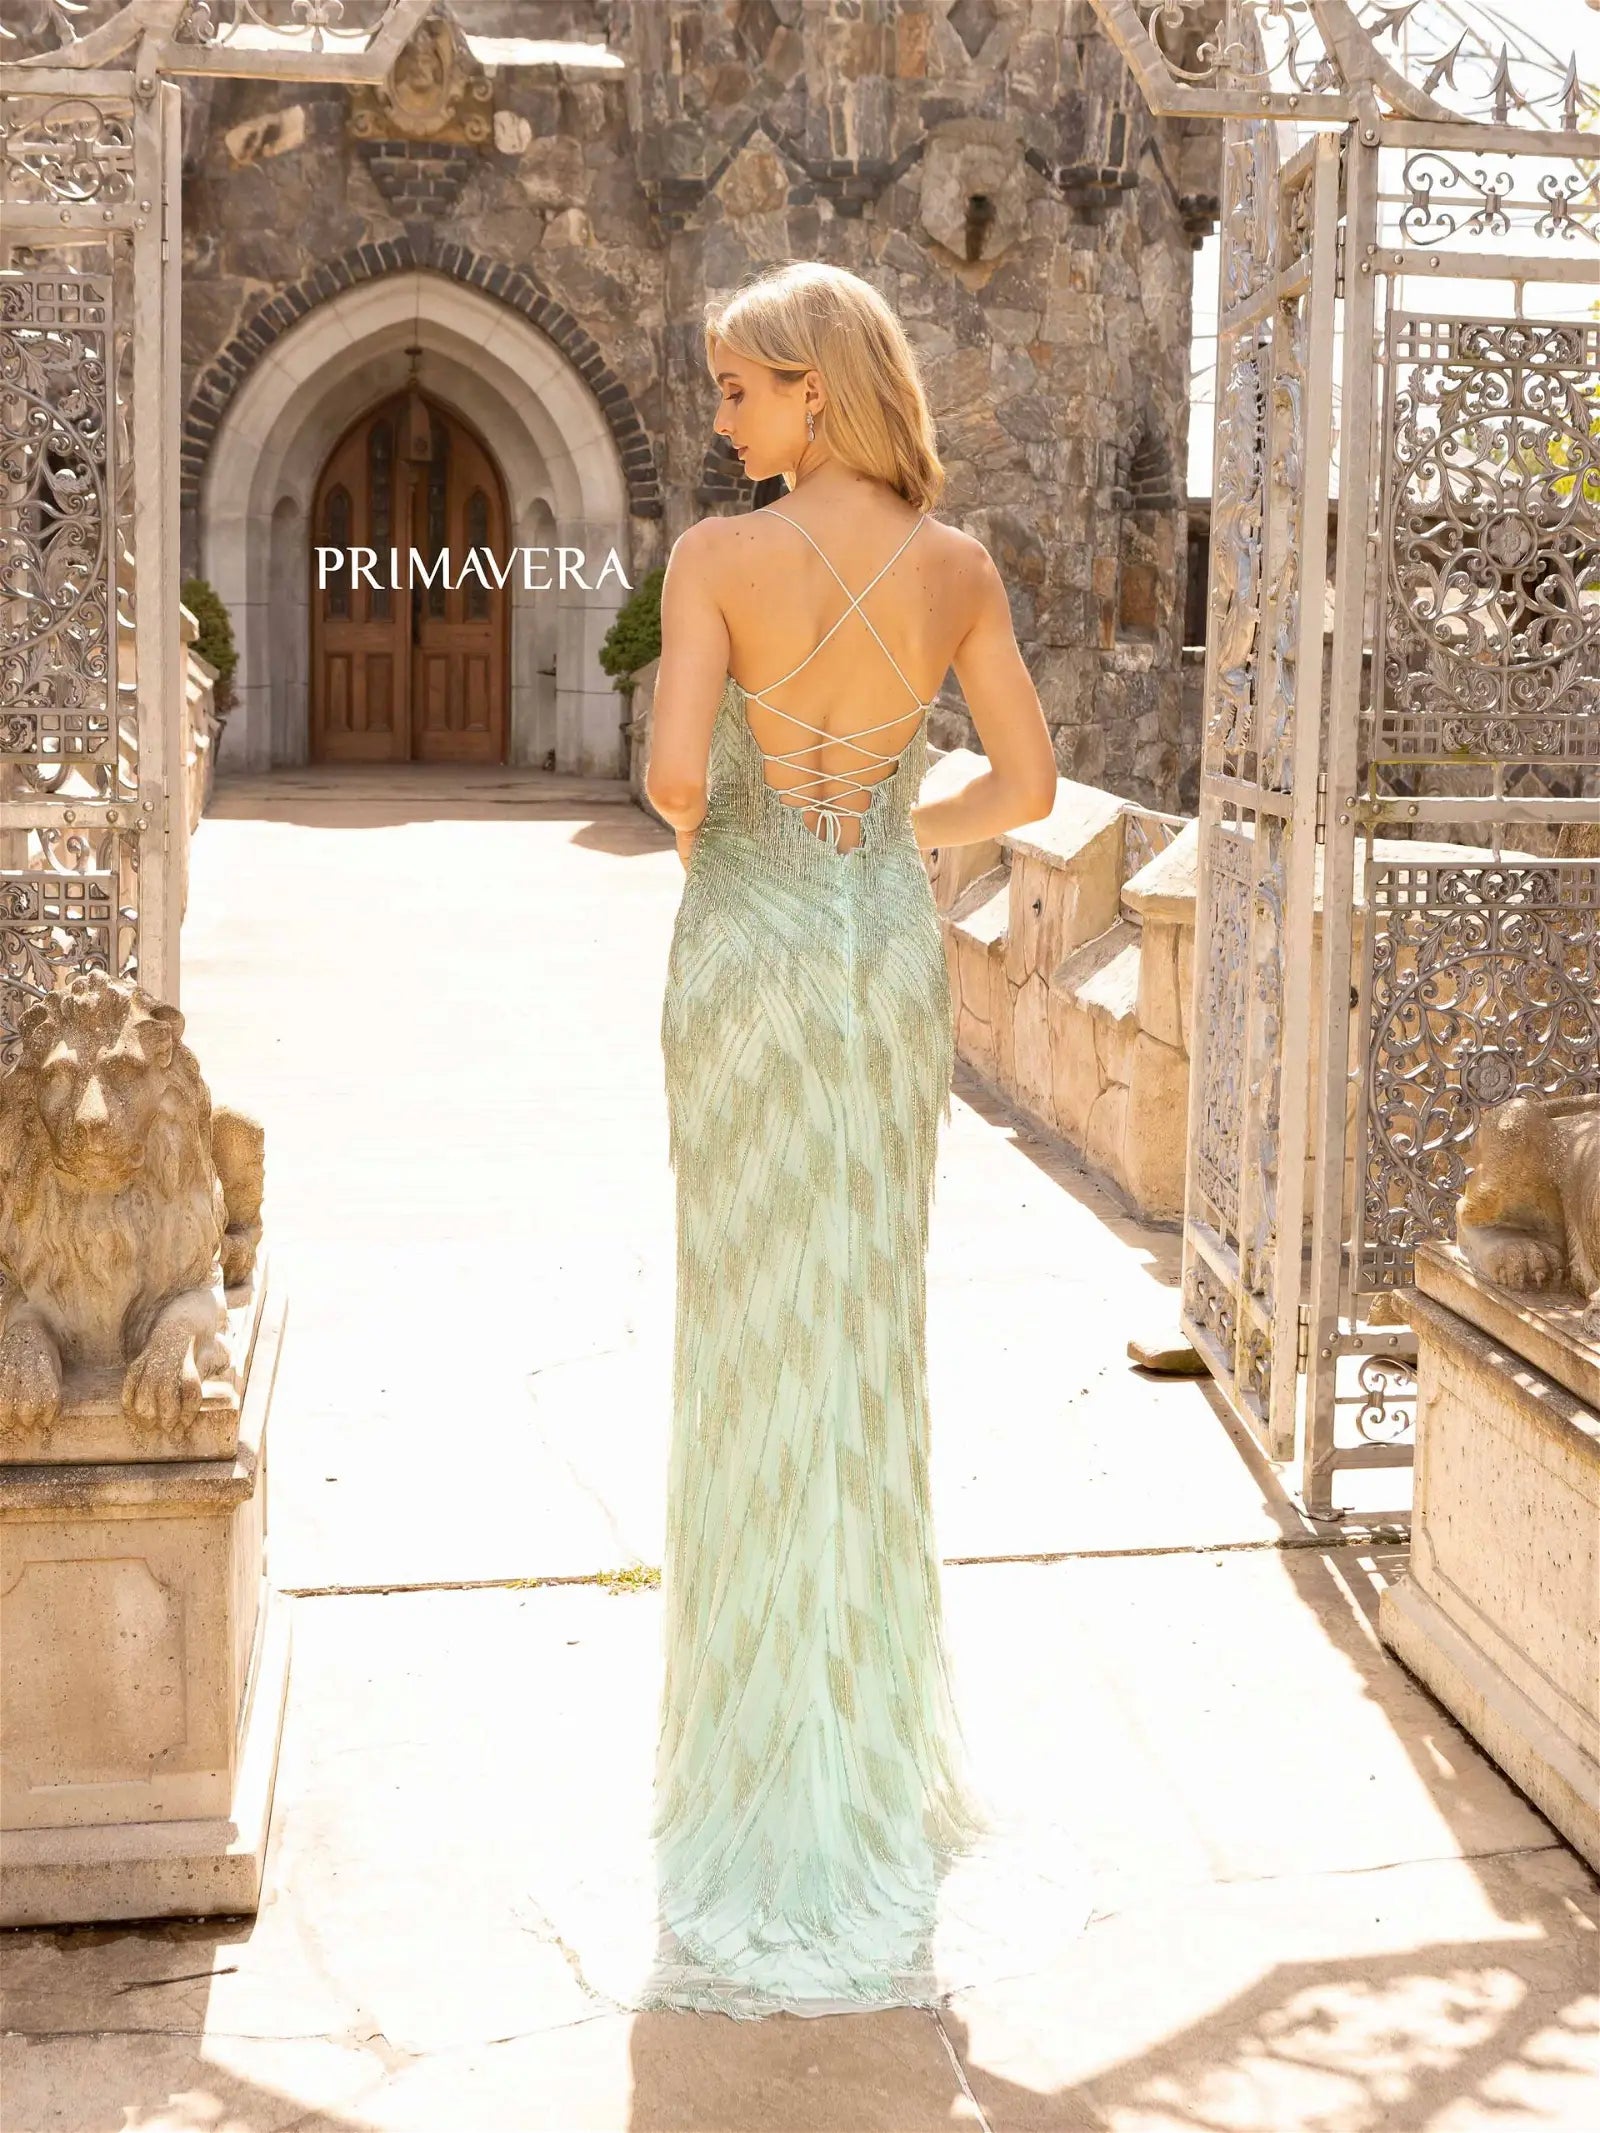 Primavera Couture 3925 Long Beaded Fringe Fitted Maxi Slit Prom Dress Backless Corset Gown V Ncekline  Sizes: 000-24  Colors: Sage Green, Mint, Perriwinkle, Black